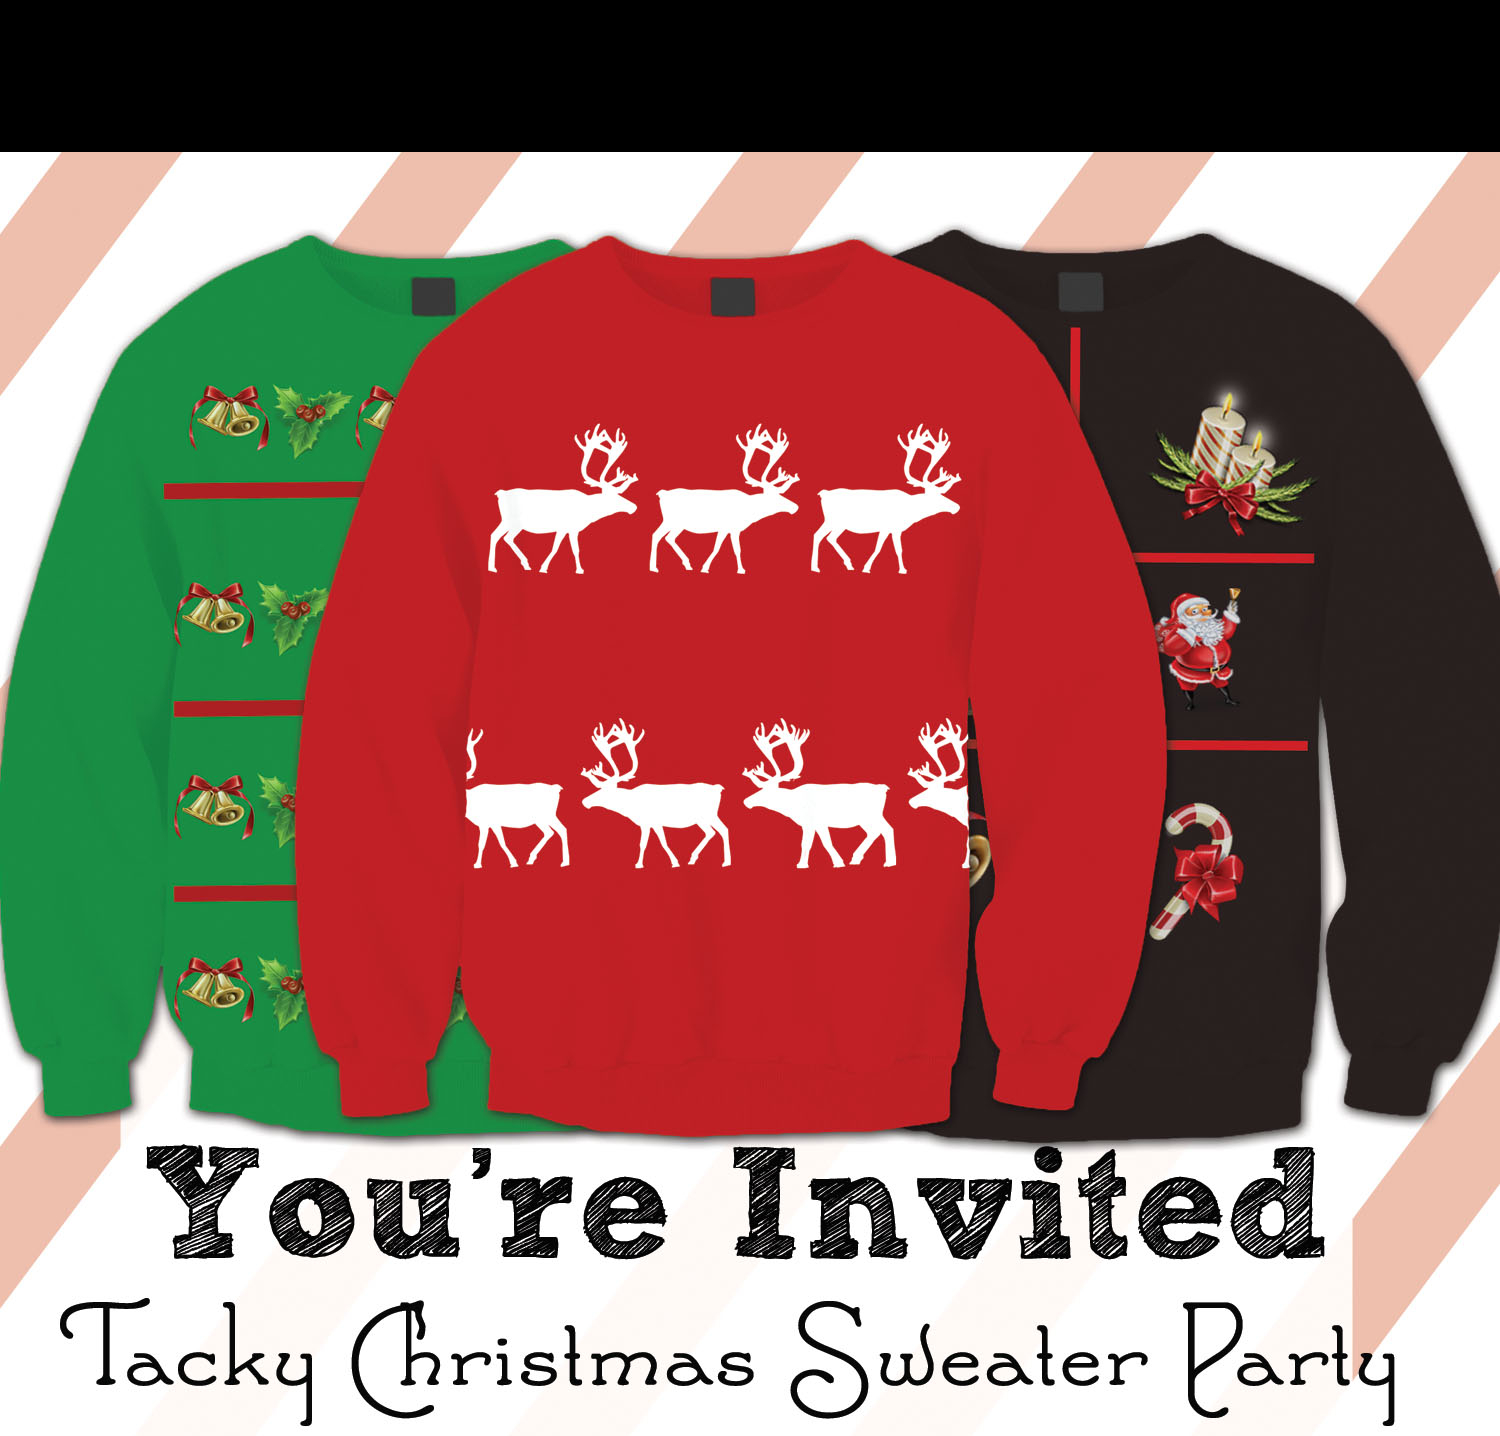 Tacky Christmas Sweater Party Invitations Free Printable This with dimensions 1500 X 1436